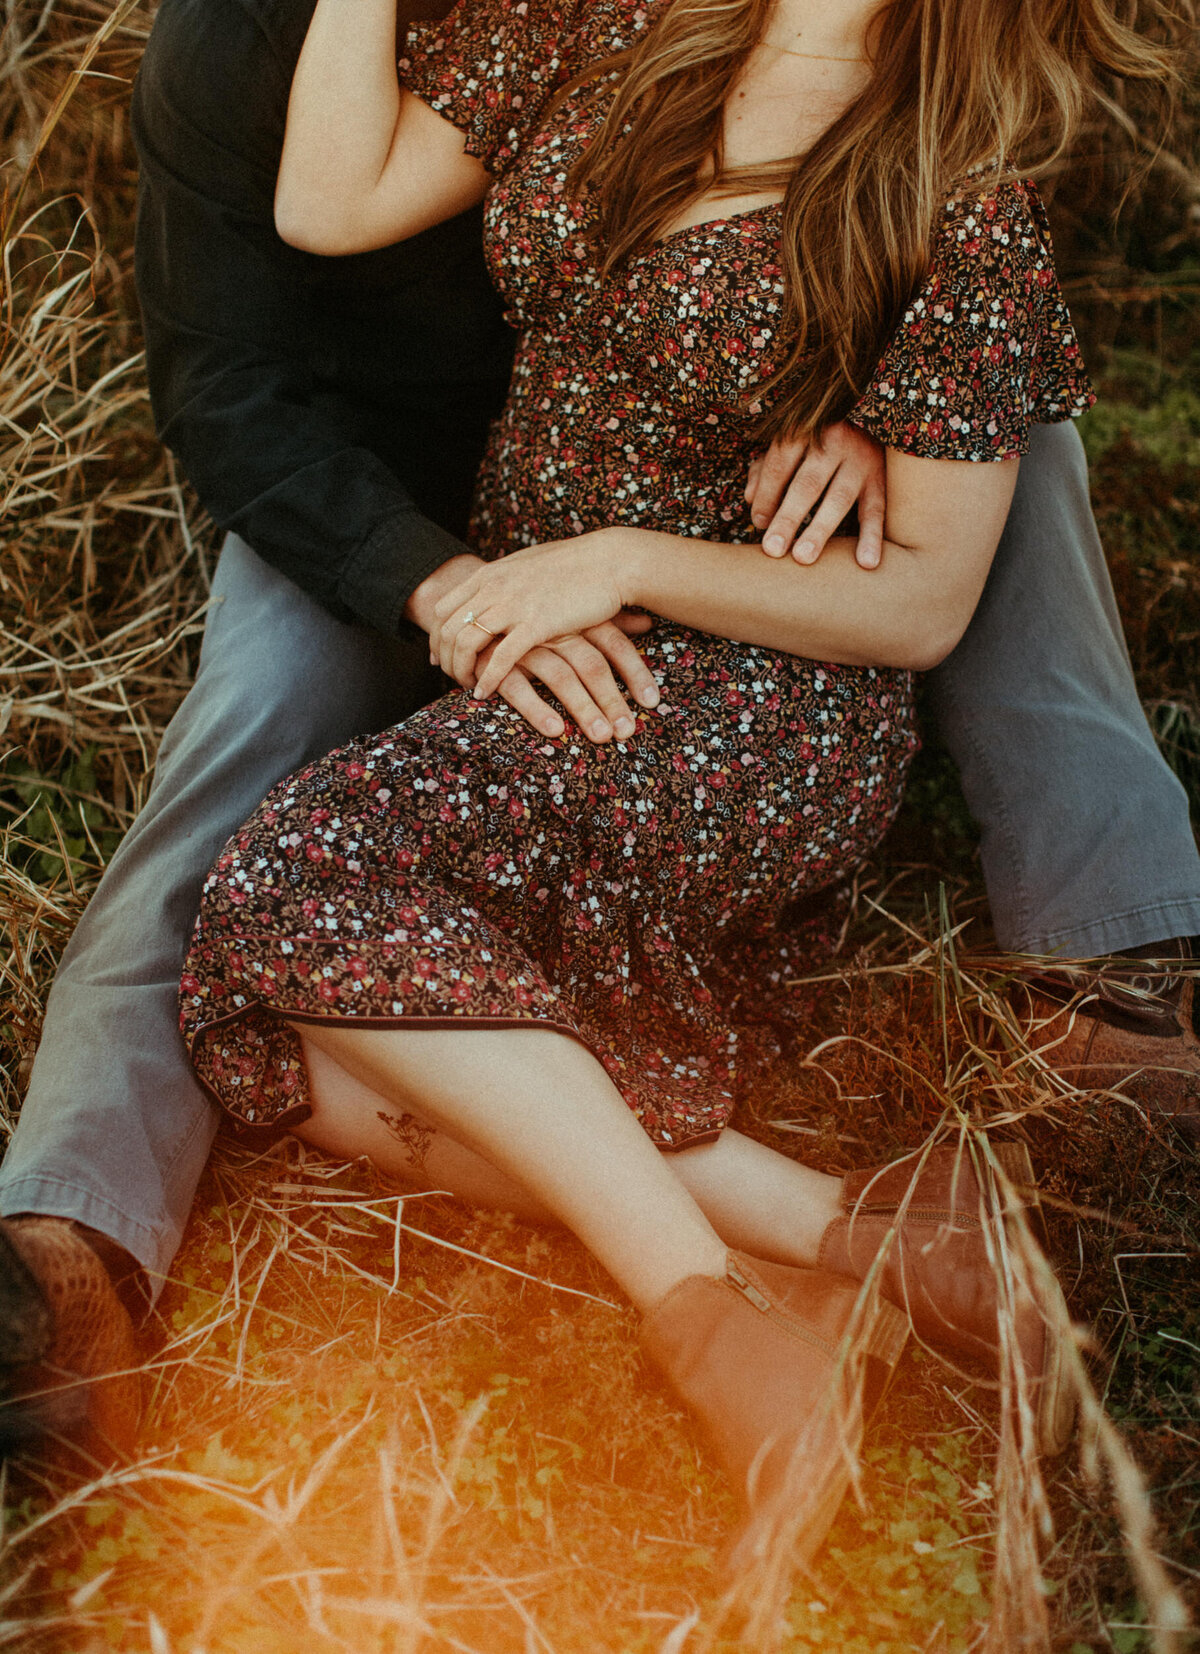 A girl in a dress is sitting on the ground between her fiancé's legs while he wraps his arms around her.